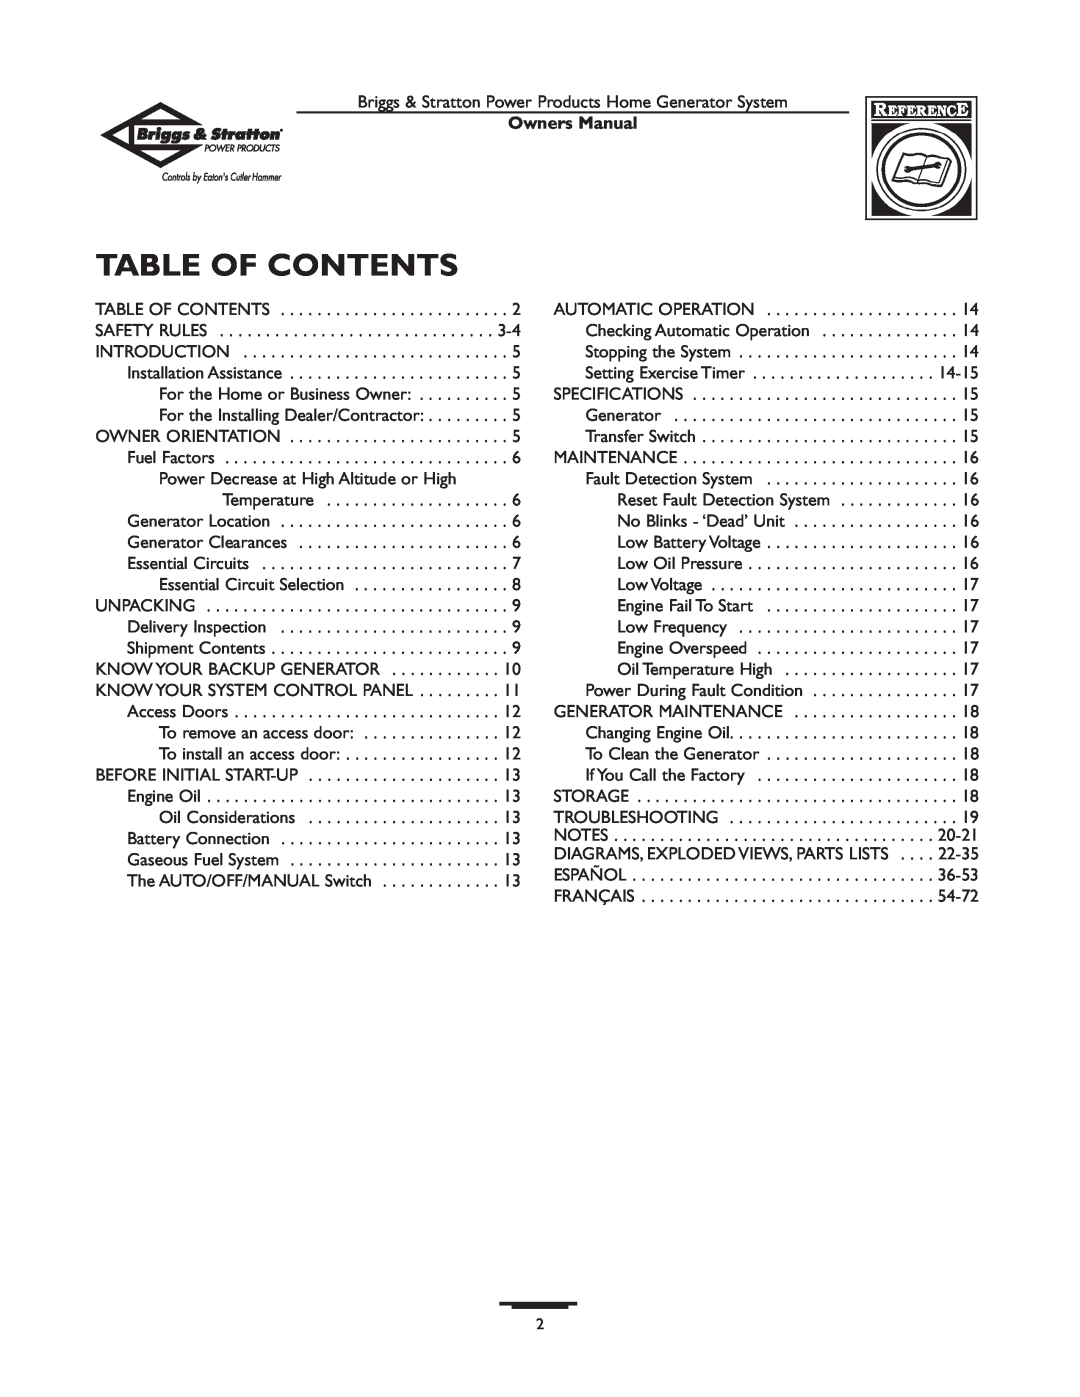 Briggs & Stratton 1679-0 owner manual Table Of Contents, Owners Manual 